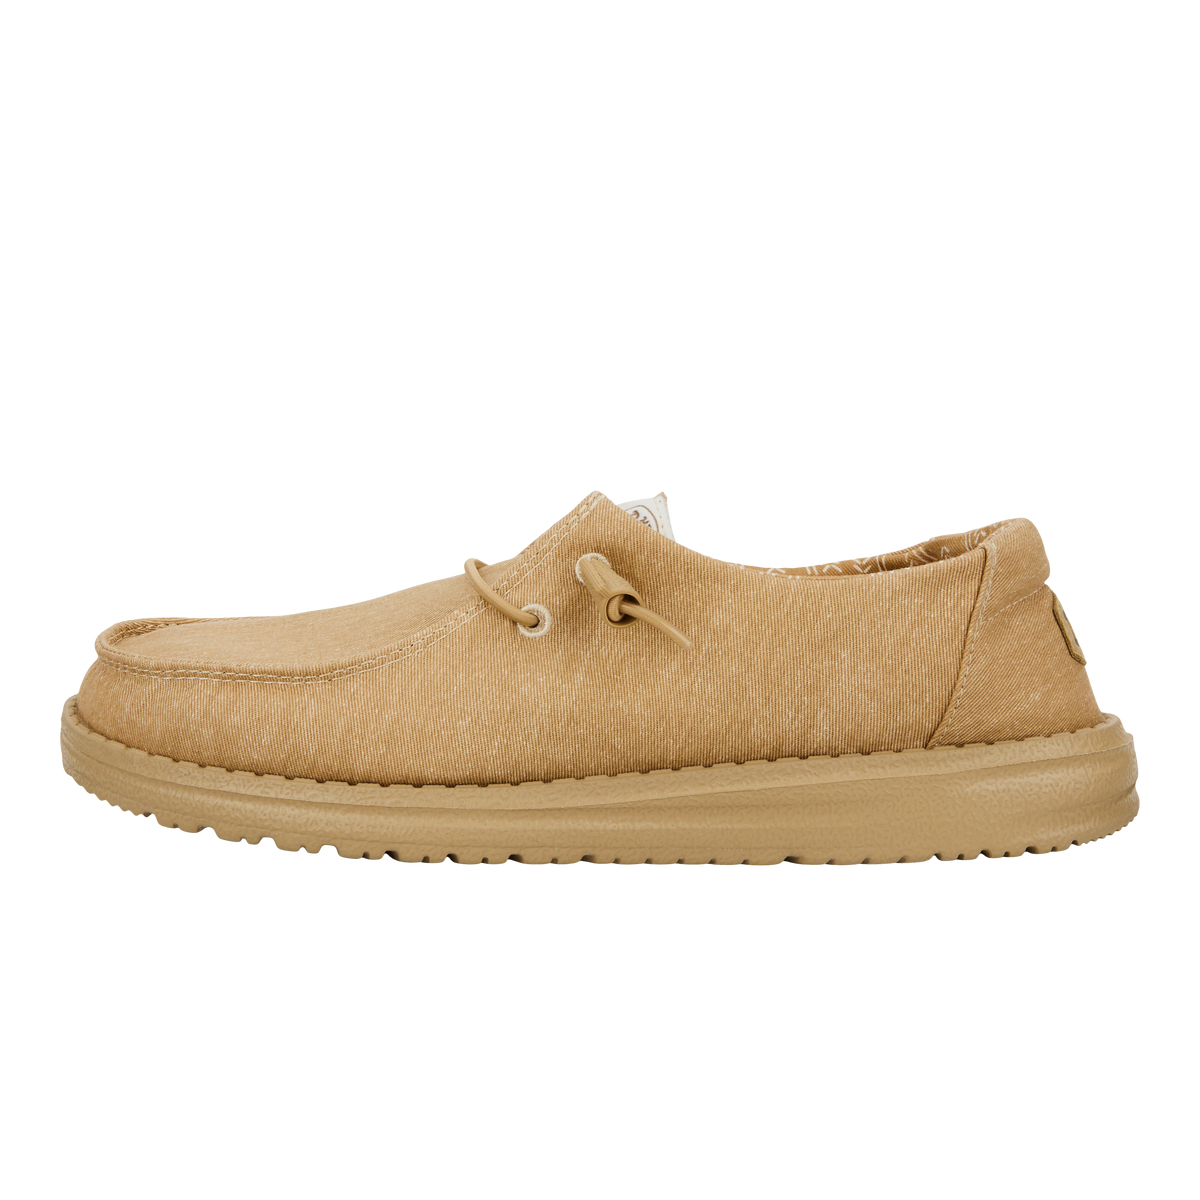 Wendy Stretch Canvas Tan/Tan - Women's Casual Shoes | HEYDUDE shoes